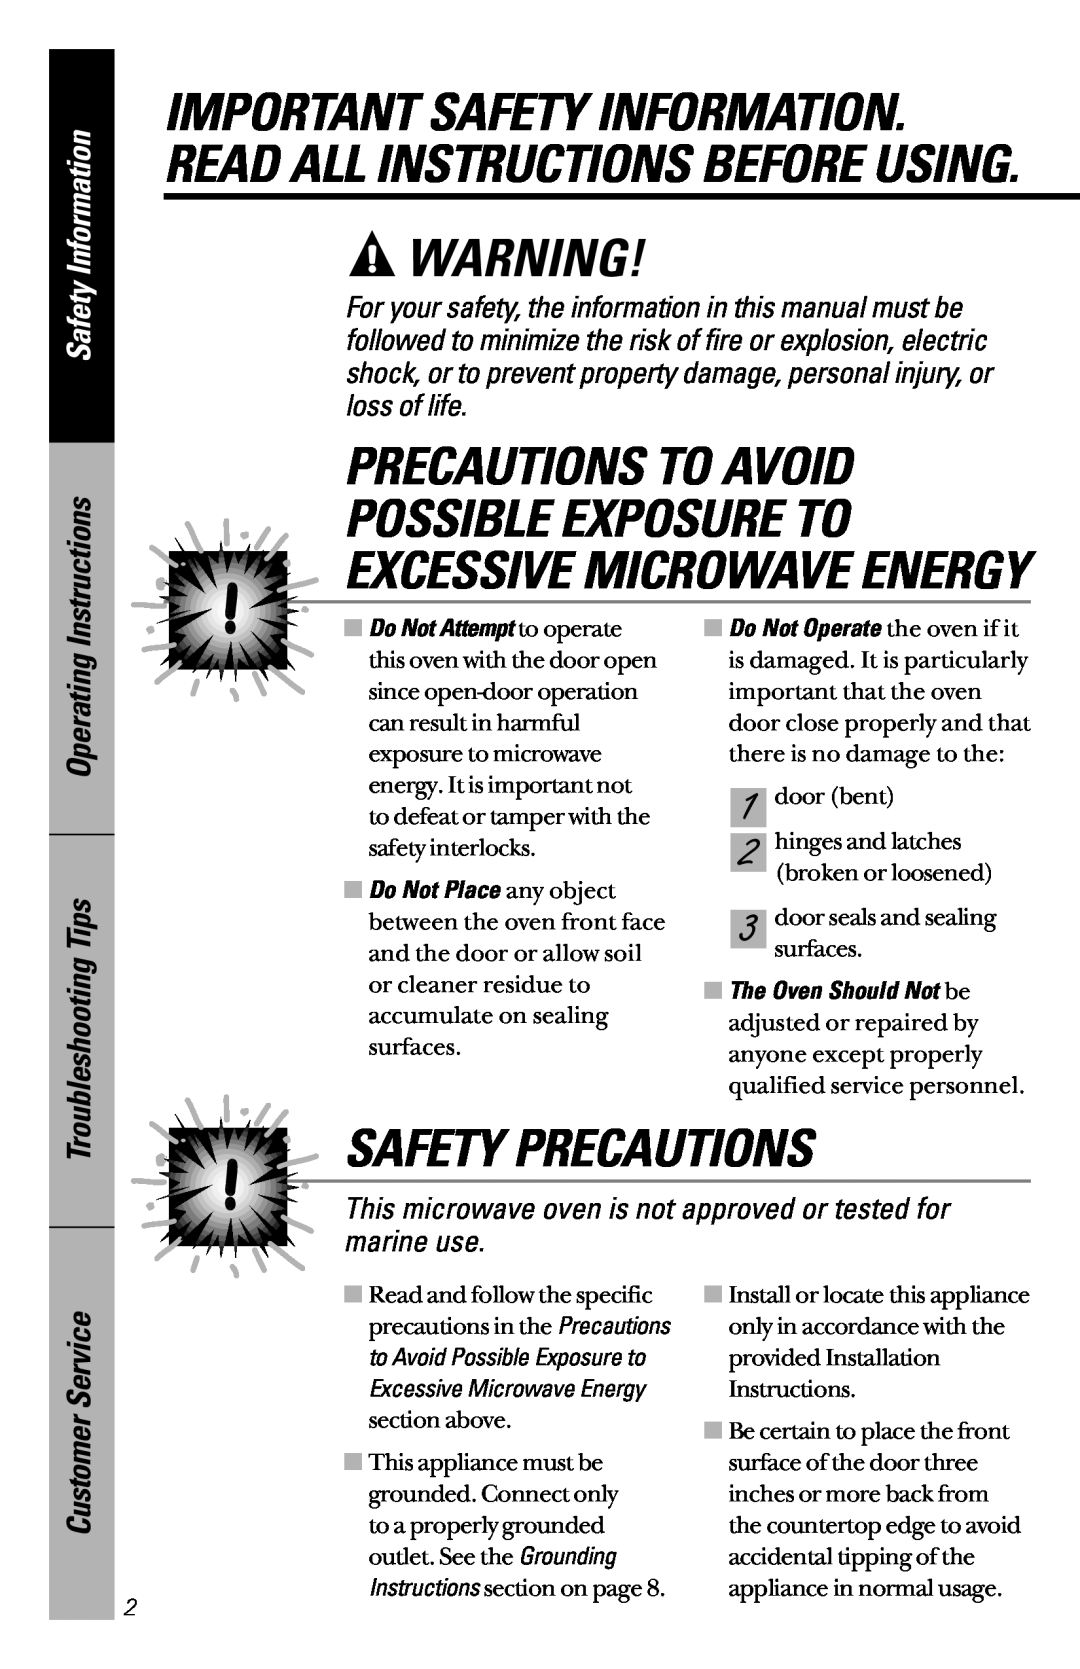 GE JES1339 Precautions To Avoid, Safety Precautions, Possible Exposure To Excessive Microwave Energy, Safety Information 